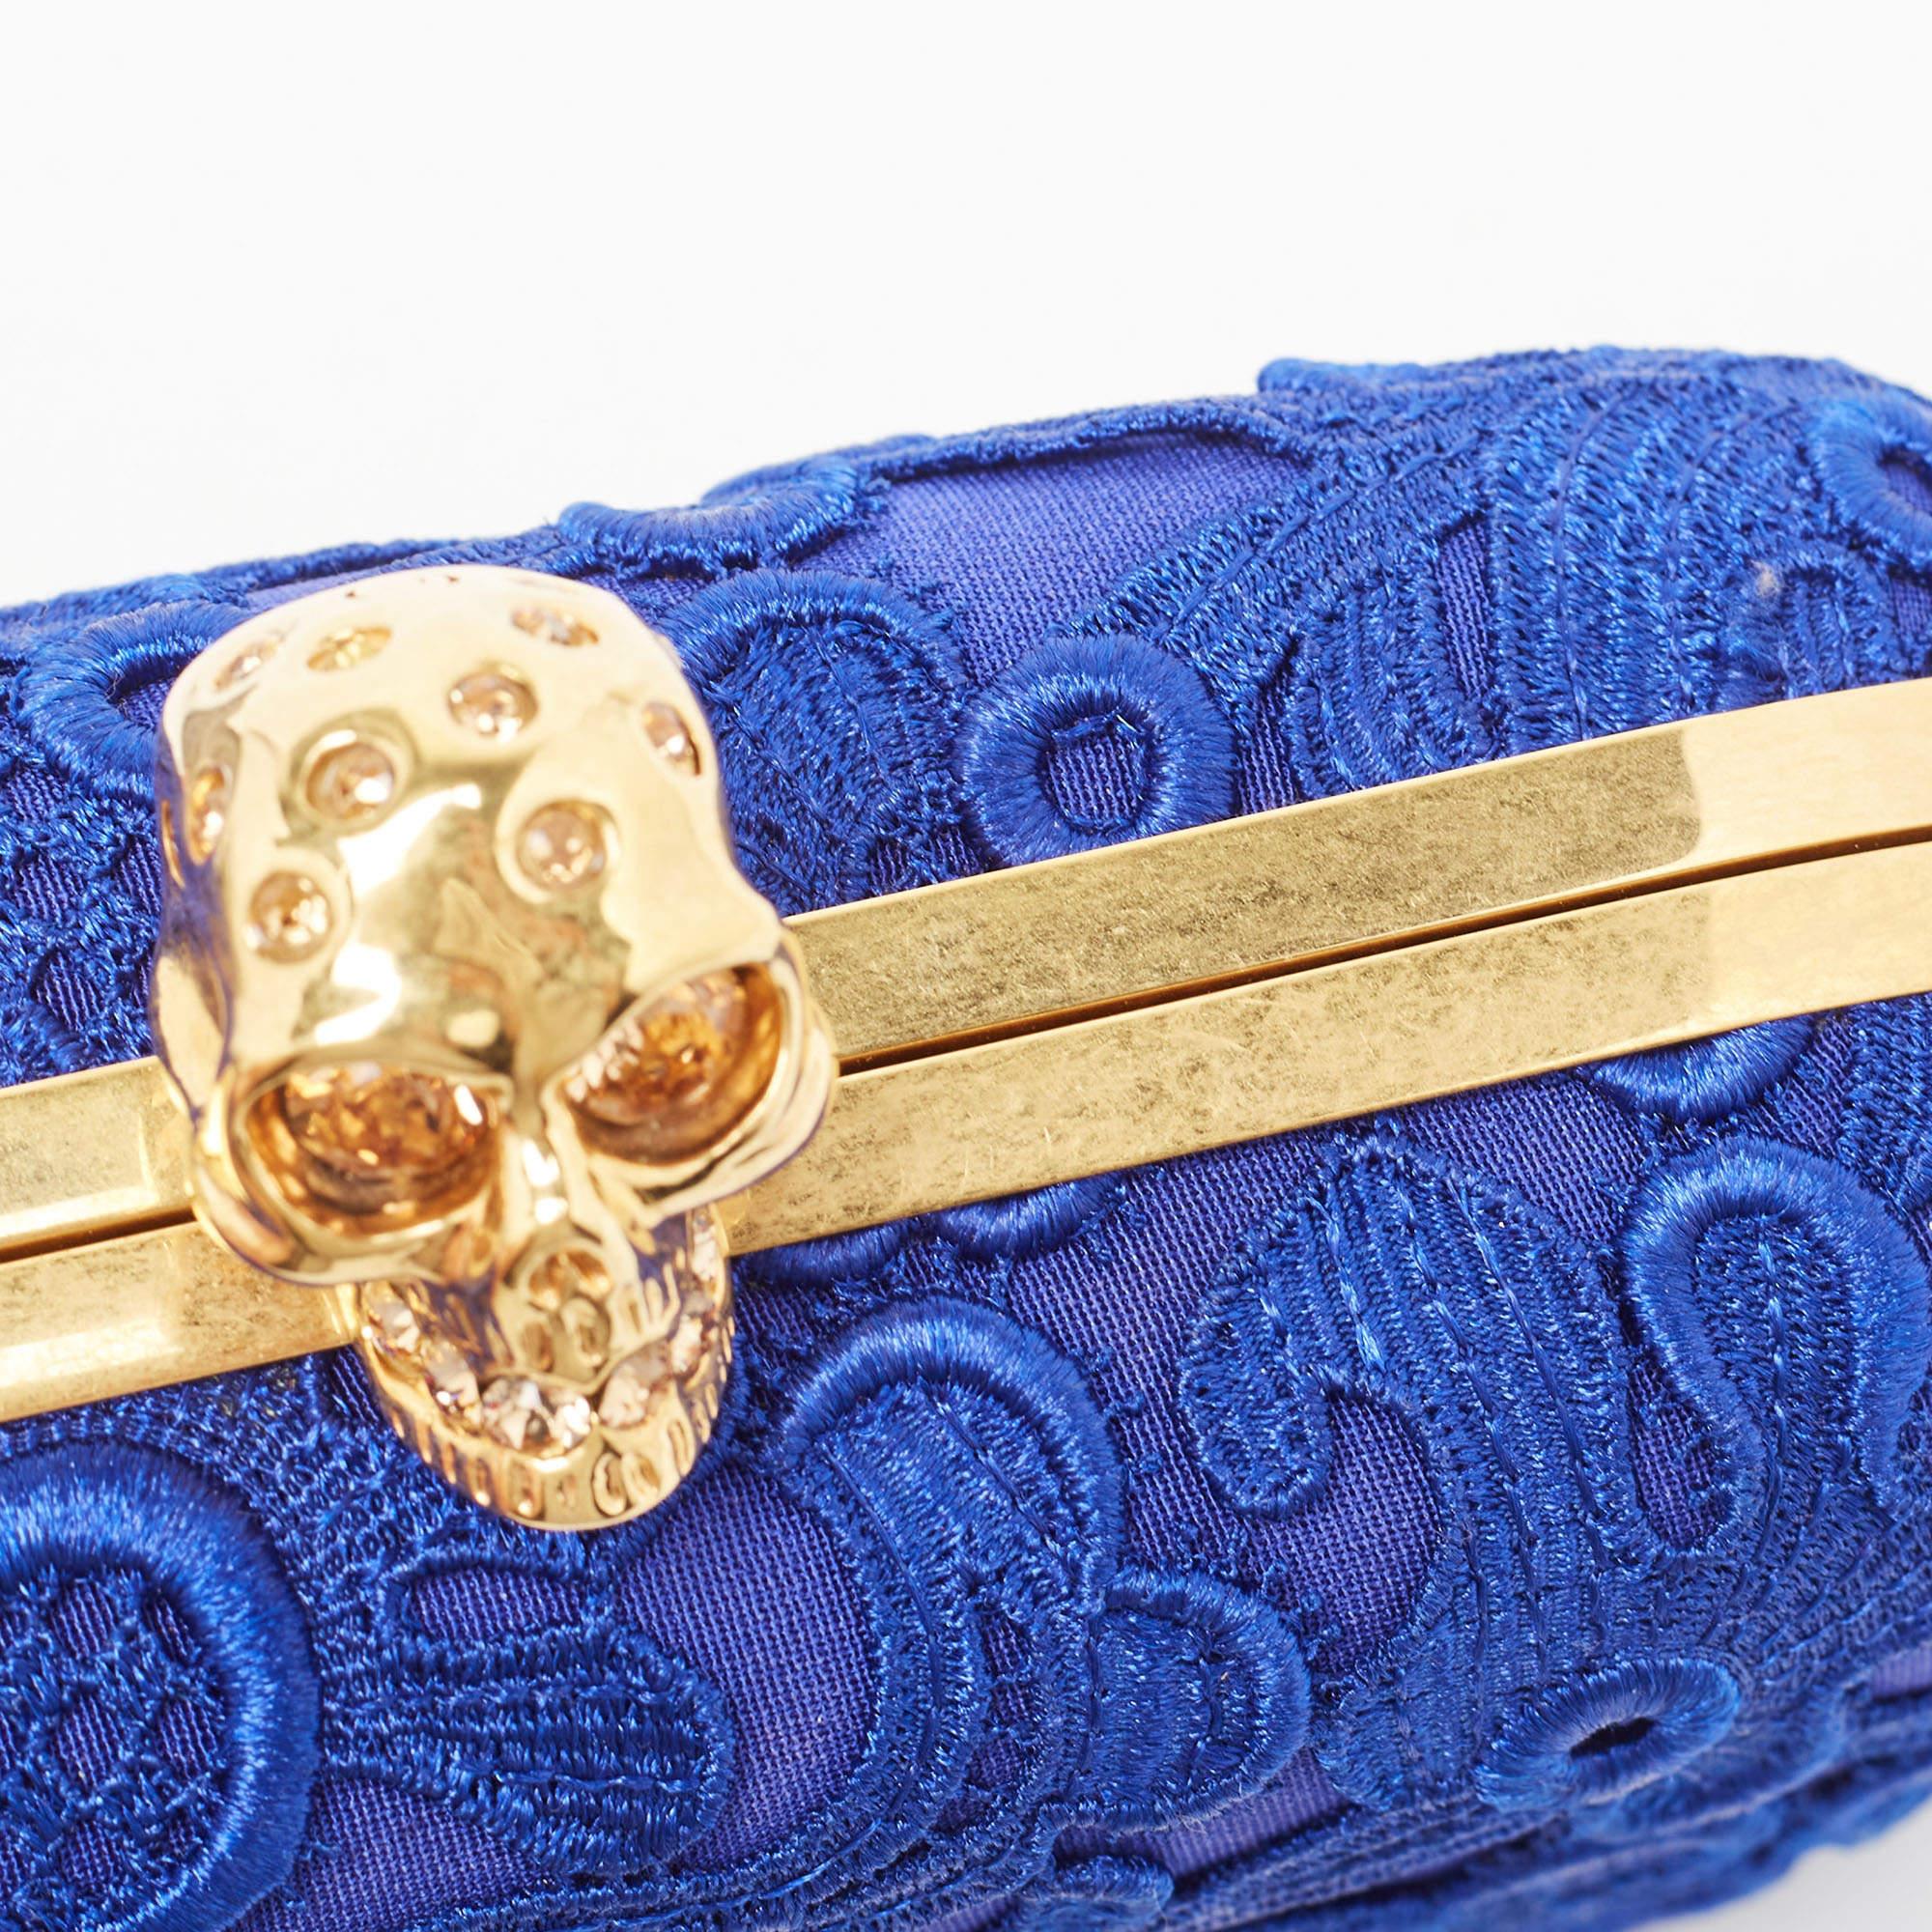 Alexander McQueen Blue Floral Lace Skull Box Clutch For Sale 8